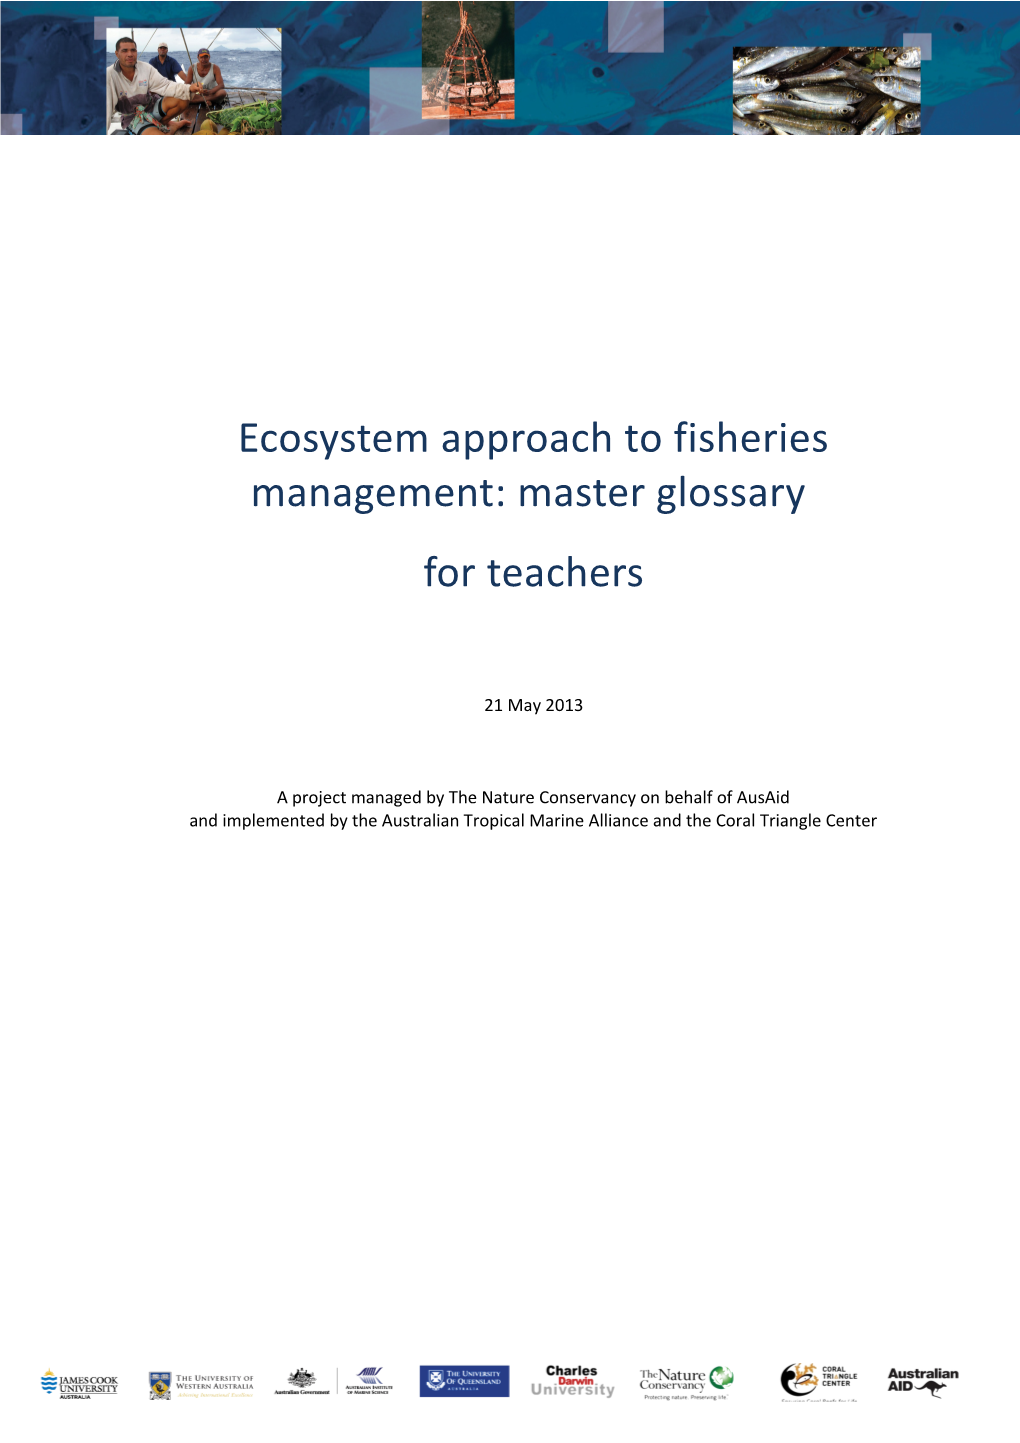 Ecosystem Approach to Fisheries Management: Master Glossary